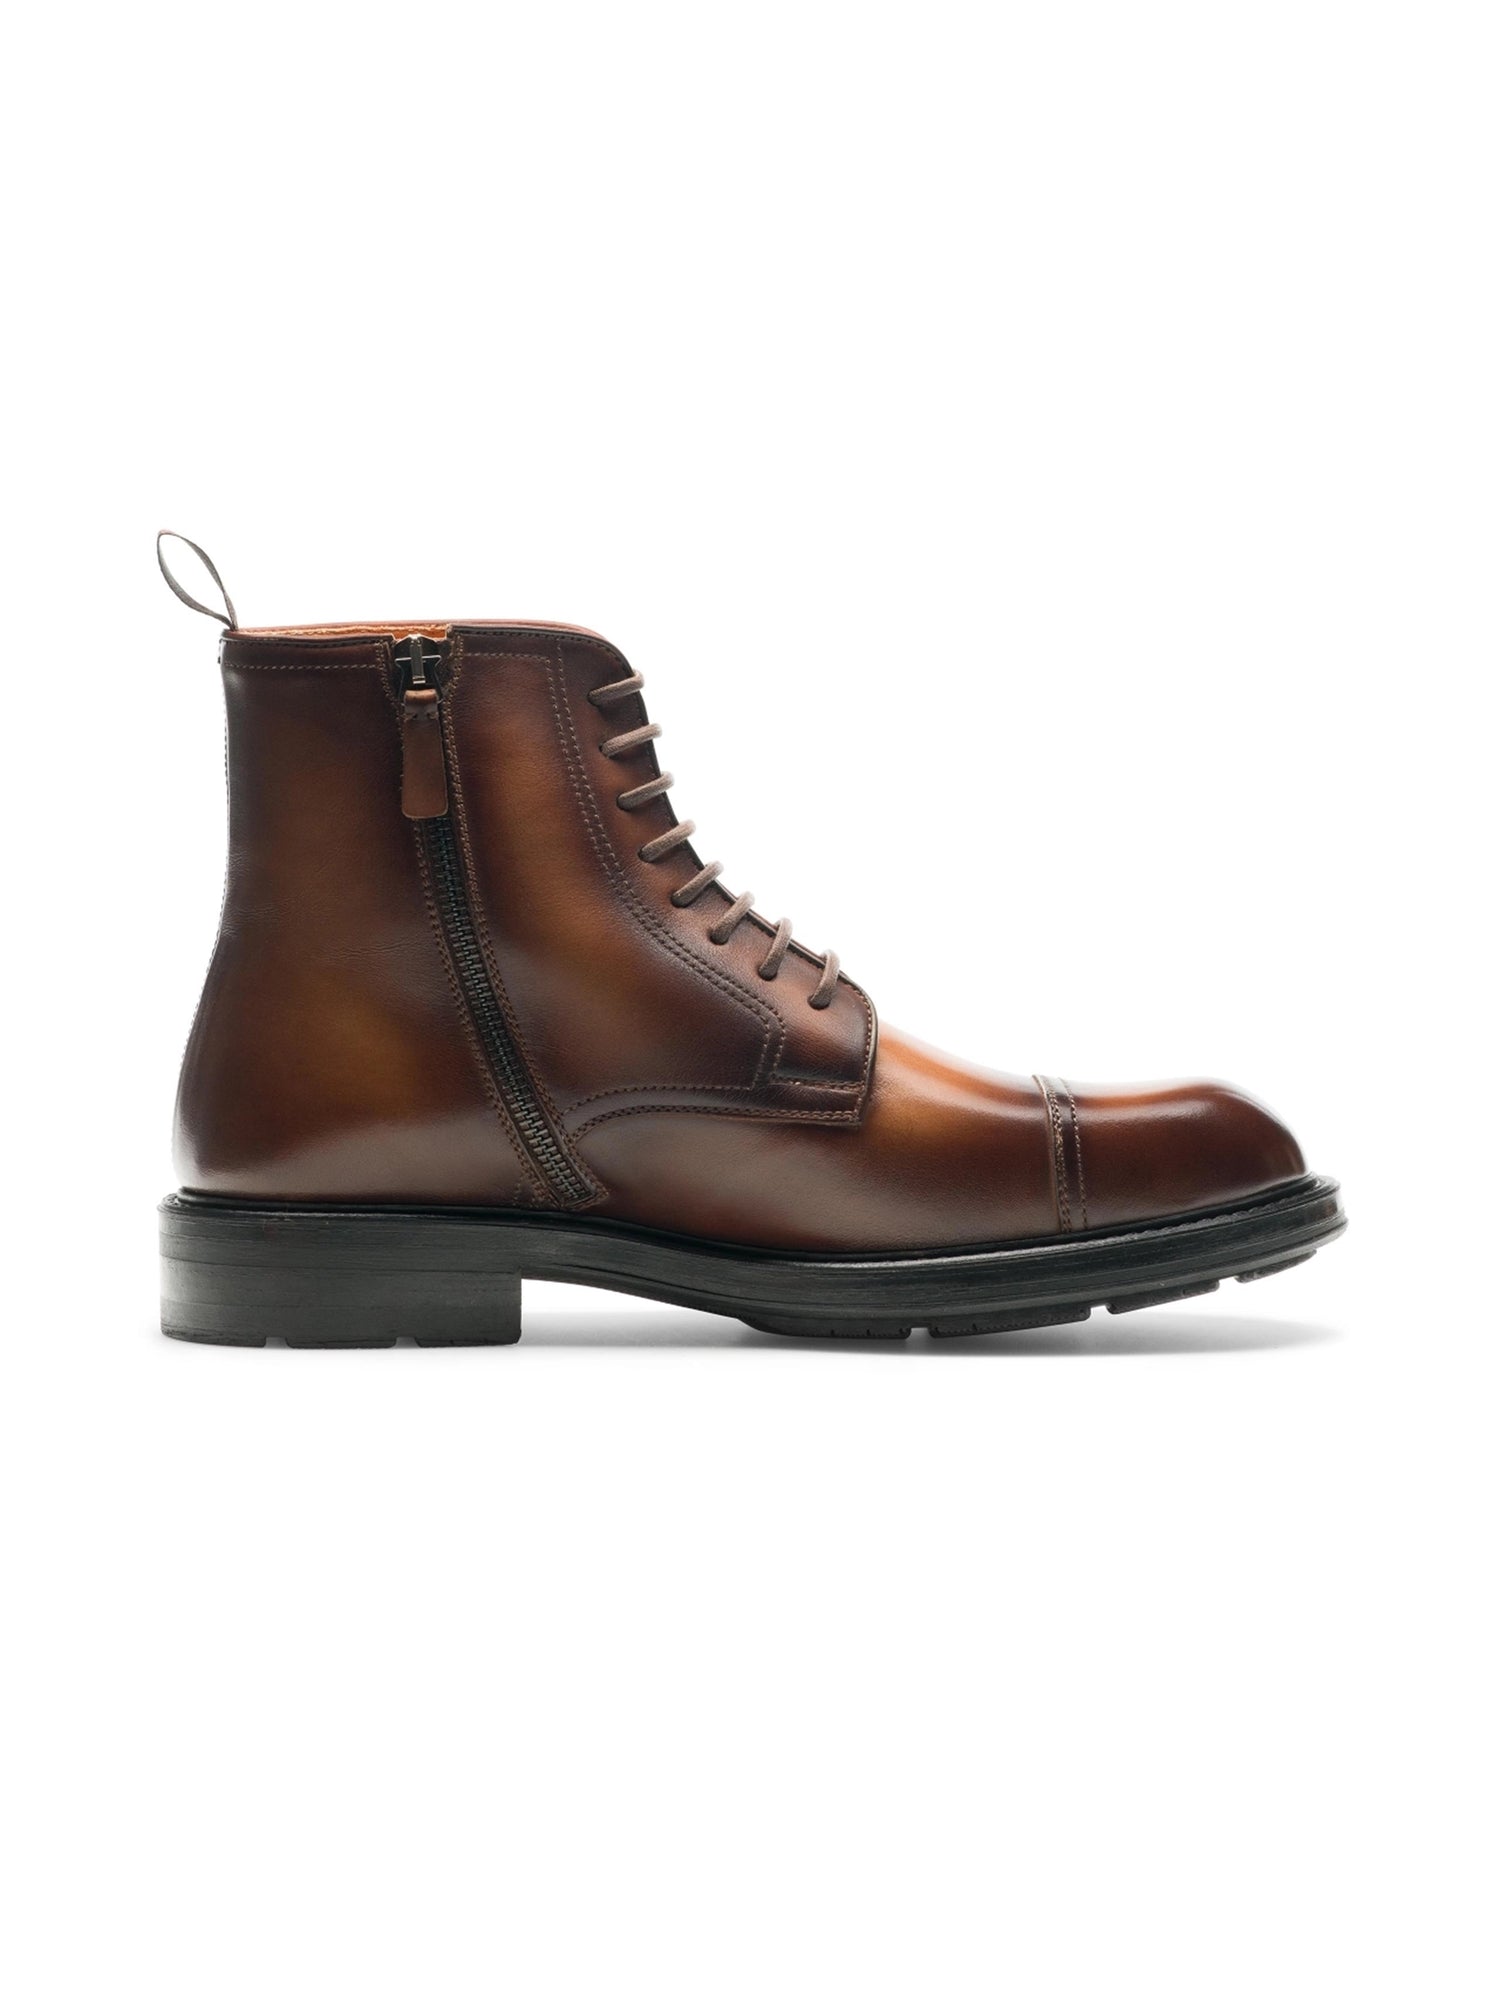 LOROTO BROWN - LACE UP BOOTS